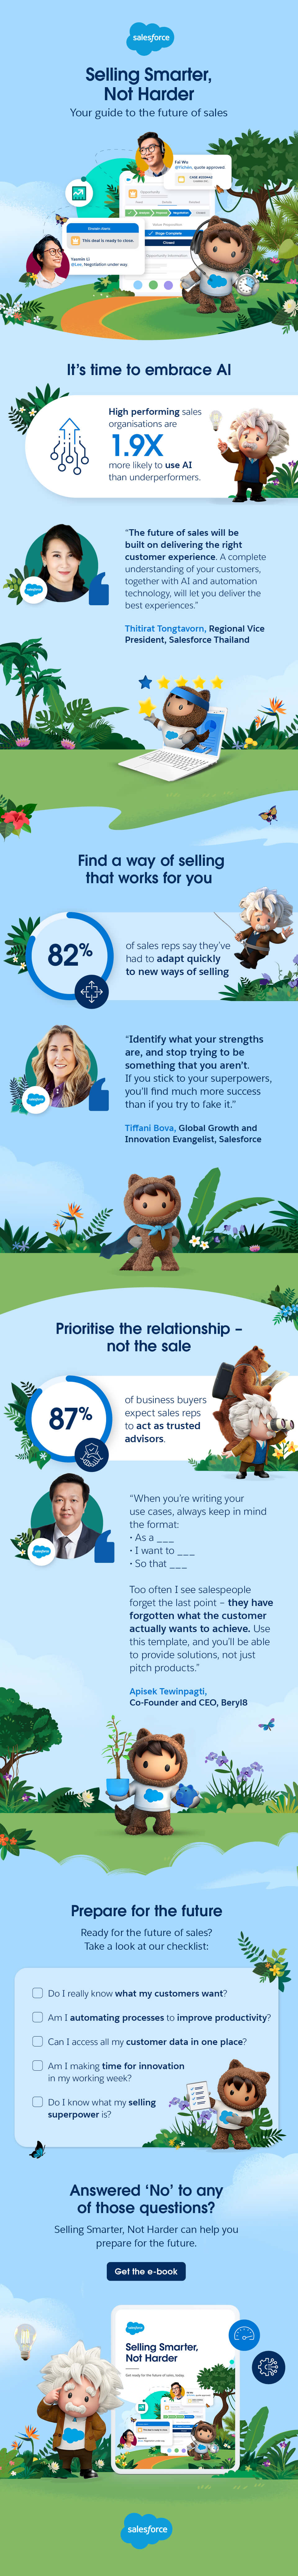 State of Sales infographic.